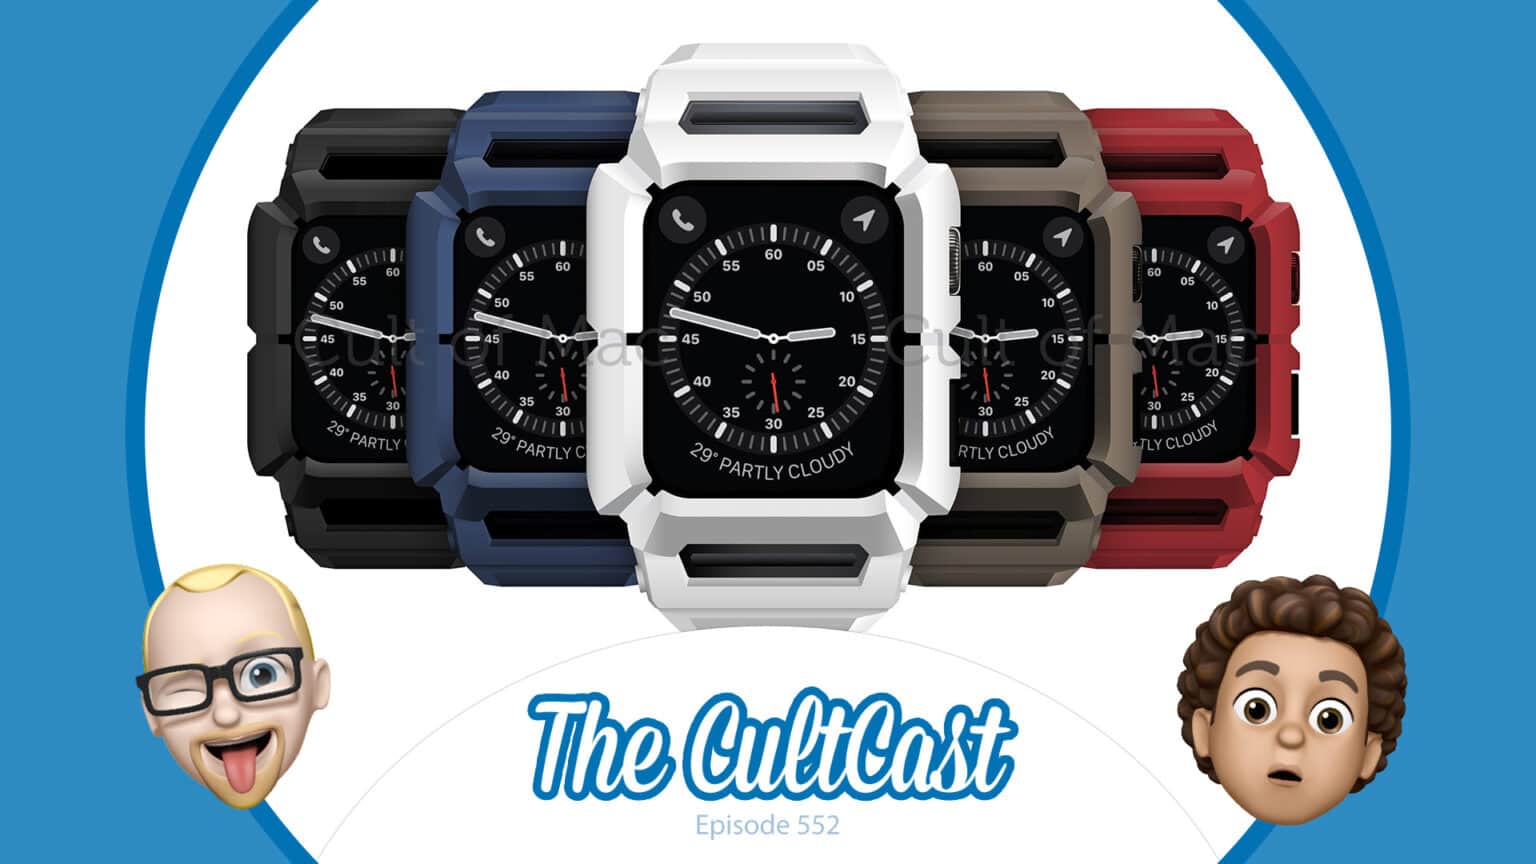 The CultCast: What, exactly, will the rumored rugged Apple Watch look like?